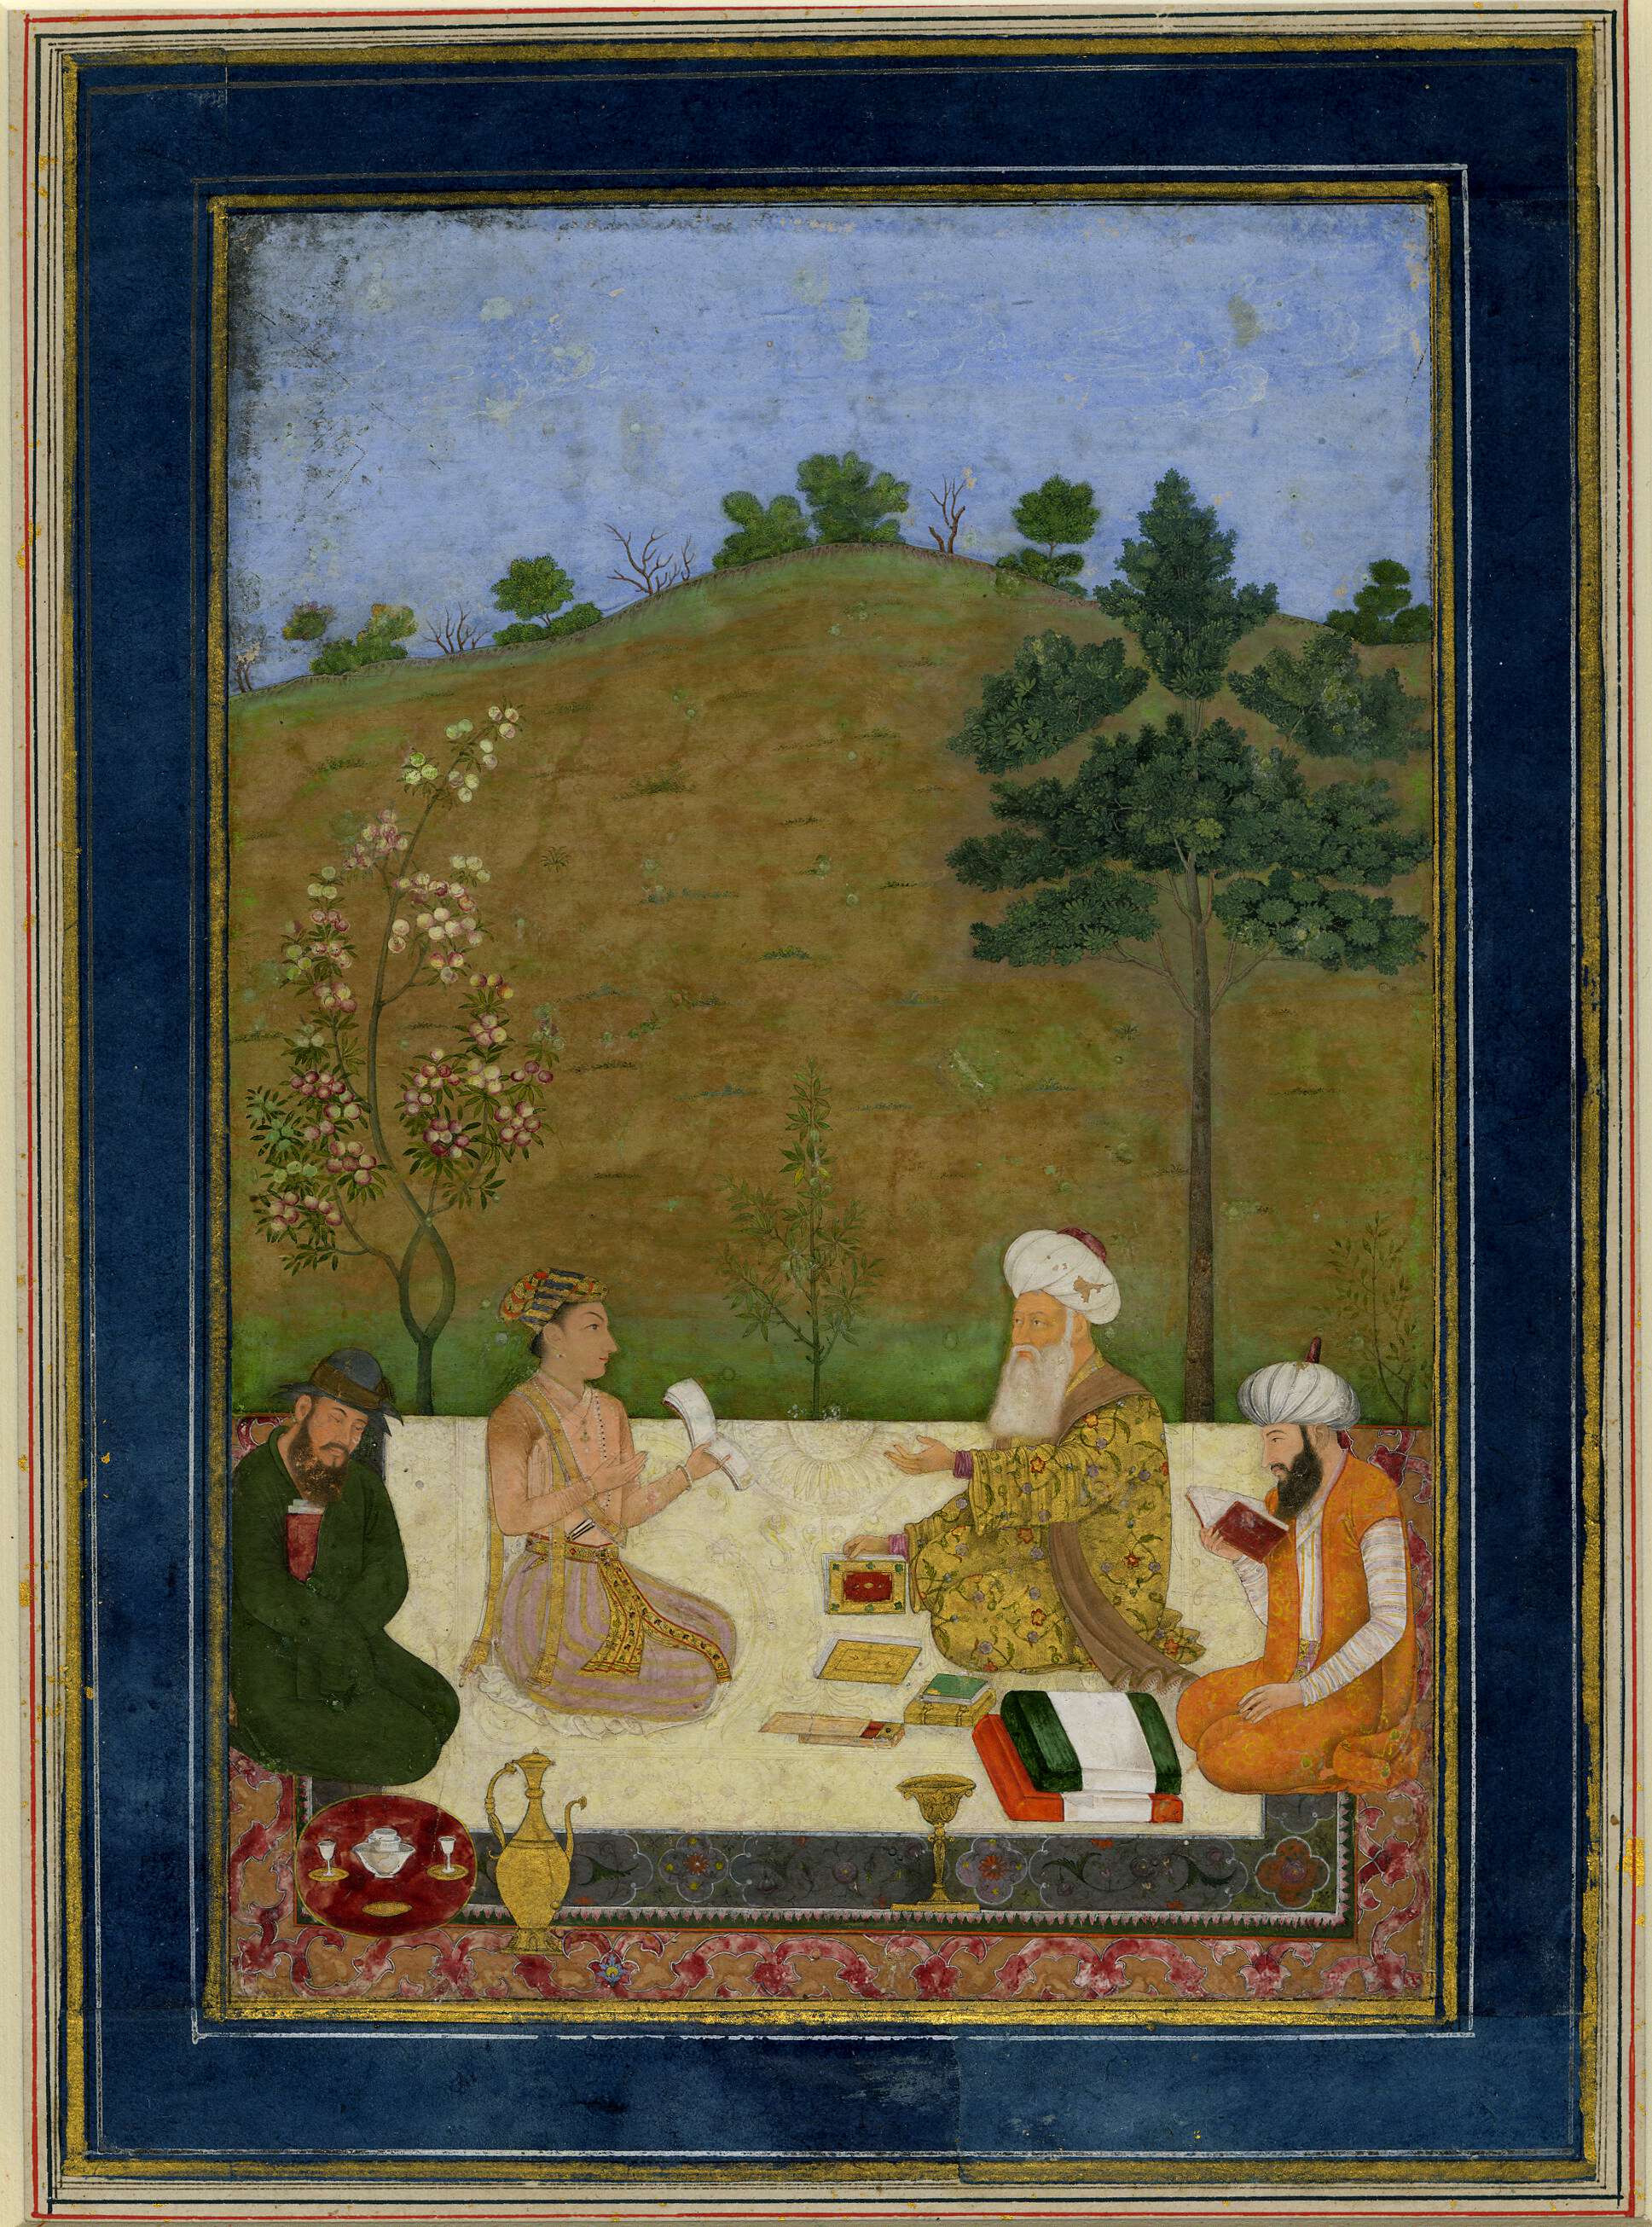 http://upload.wikimedia.org/wikipedia/commons/4/4c/D%C3%A1r%C3%A1_Shik%C3%BAh_with_three_sages_with_inscription.jpg